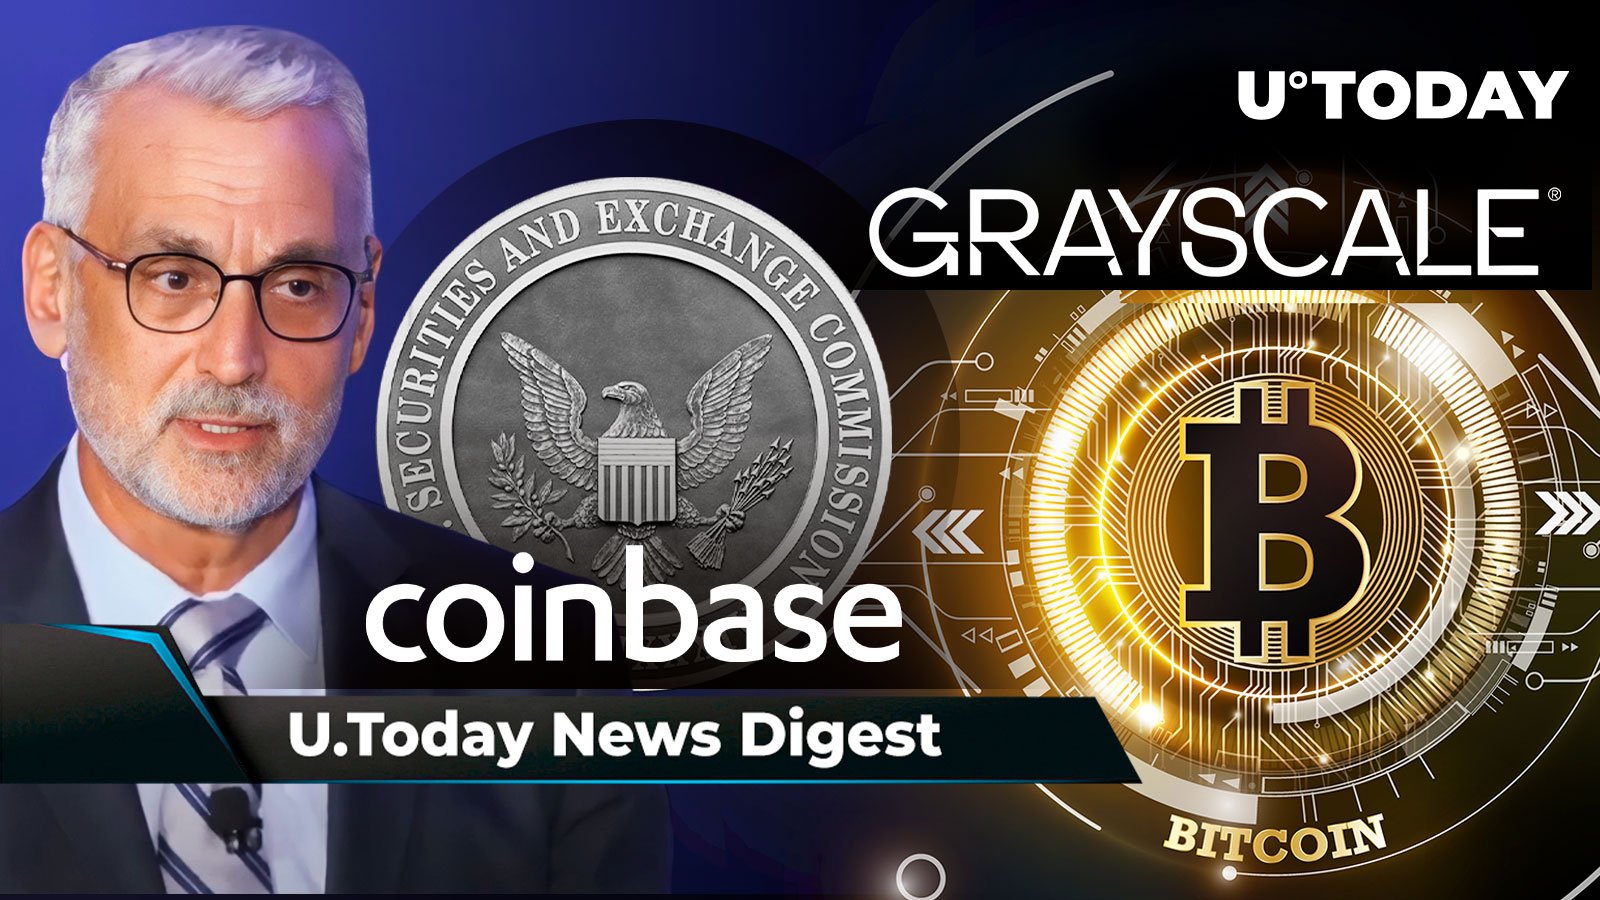 Grayscale Dumps .14 Billion in BTC, Ripple CLO Exposes Major Misconduct in Coinbase v. SEC Case, Gemini’s Cryptic XRP Posts Stir Community: Crypto News Digest by U.Today